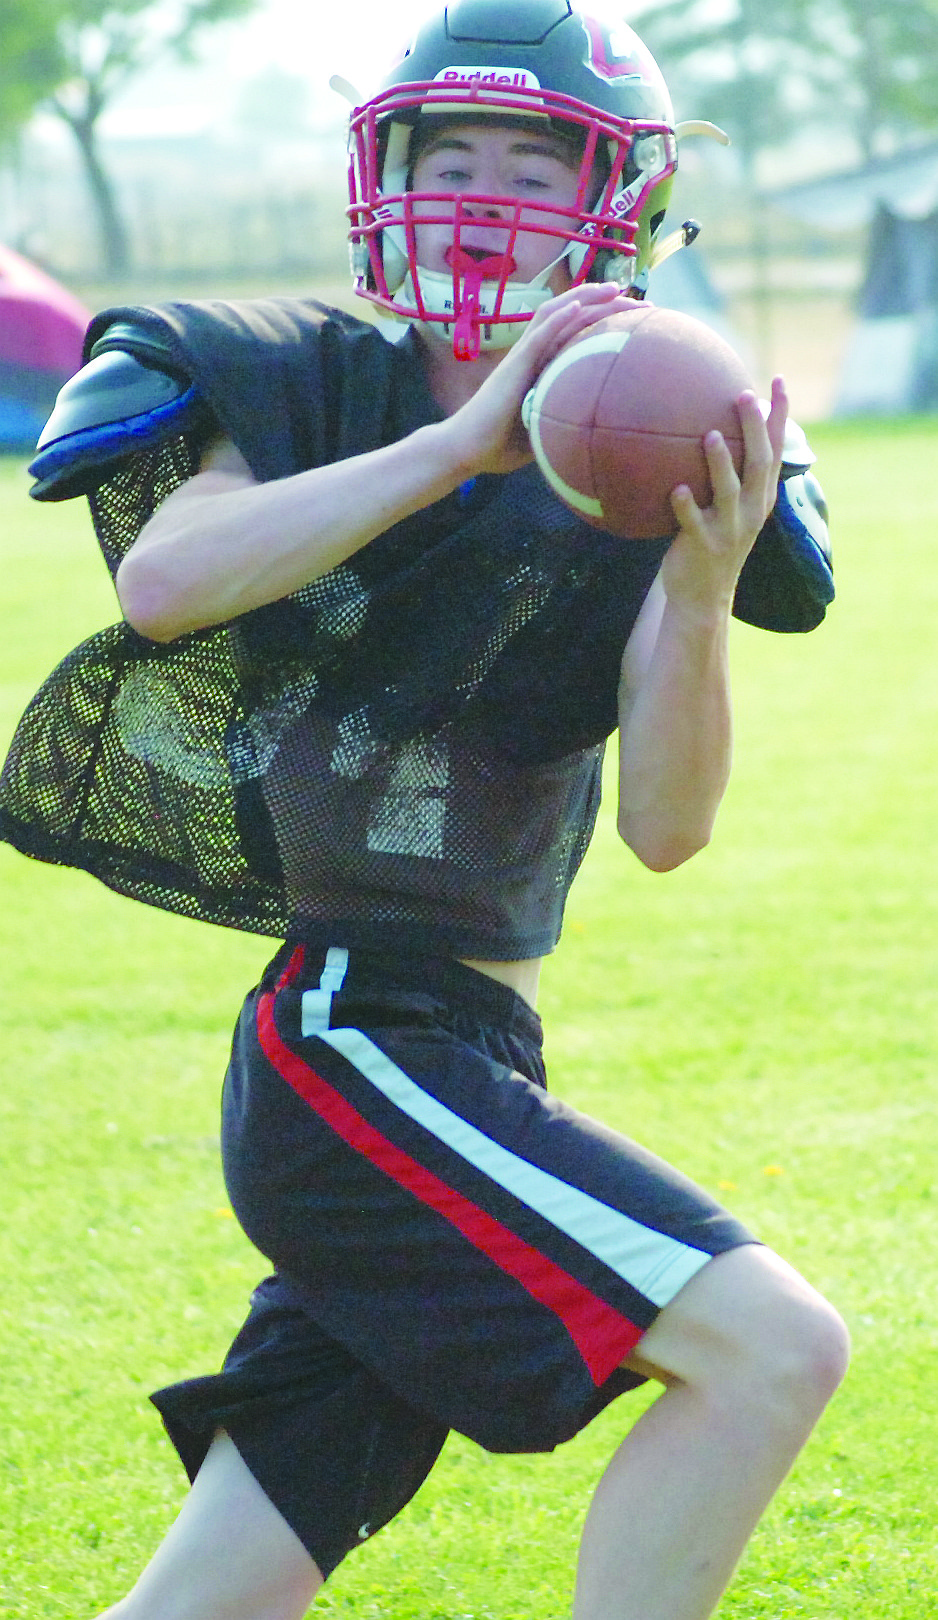 Kyle Lawson snags a pass during a Horsemen practice last Saturday in Plains.